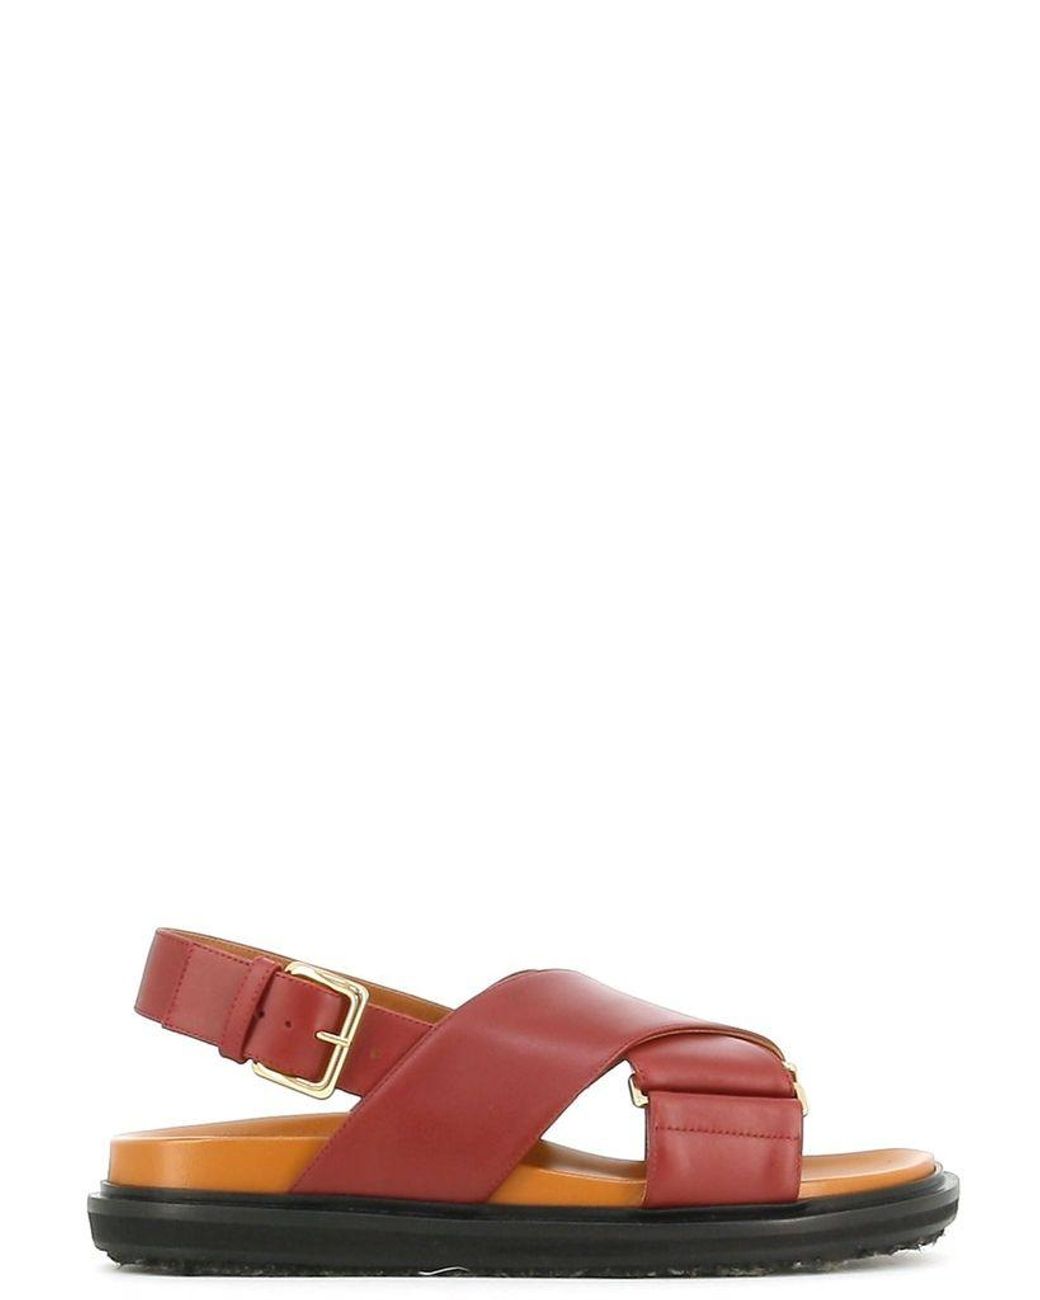 Marni Leather Fussbett Sandals in Red | Lyst Canada